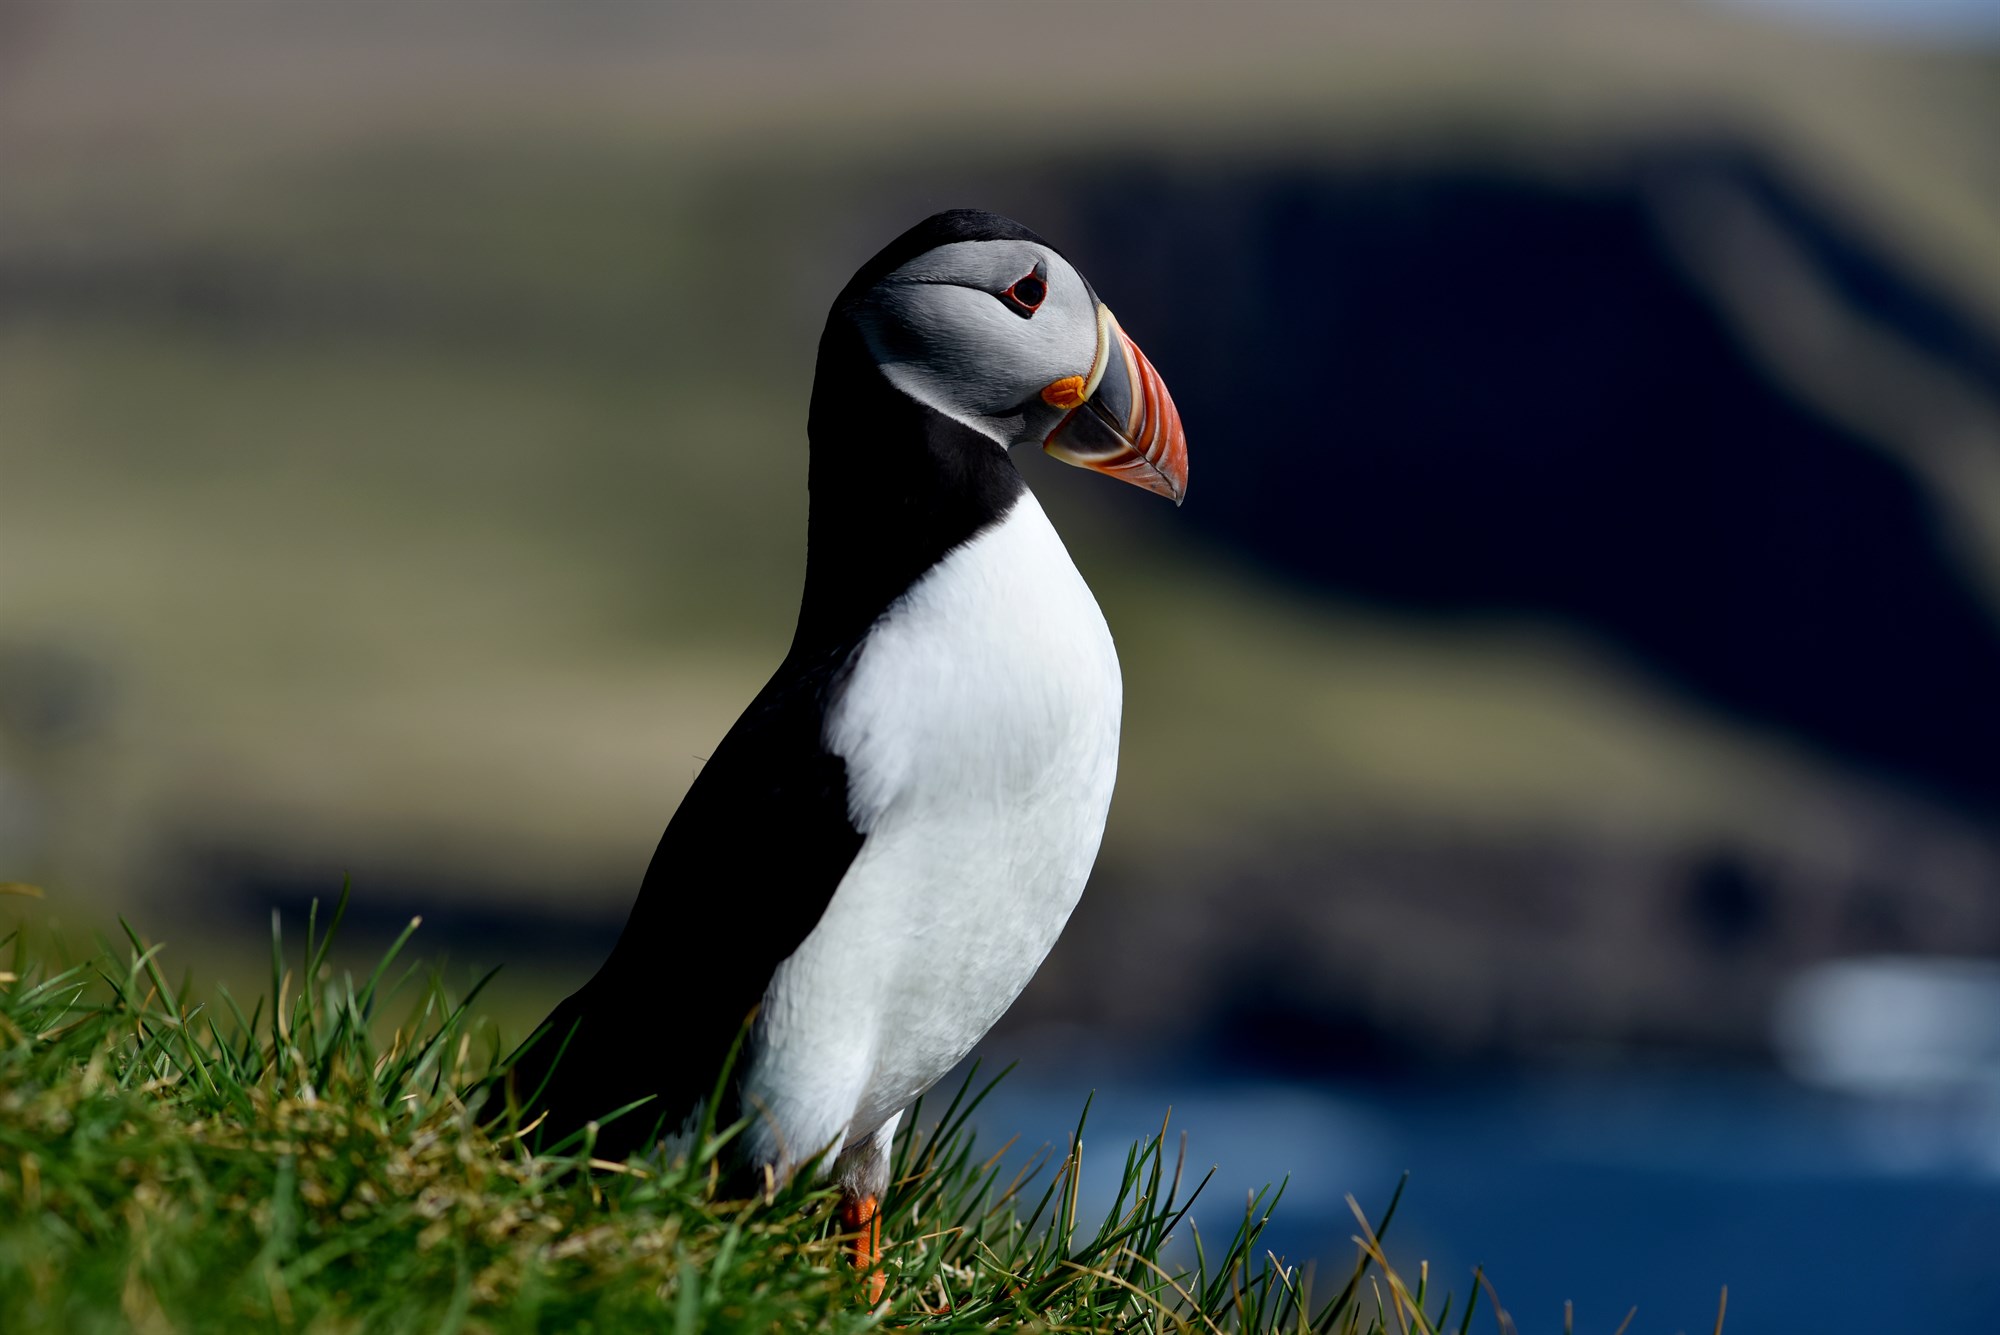 The Best of Iceland Wildlife Photography